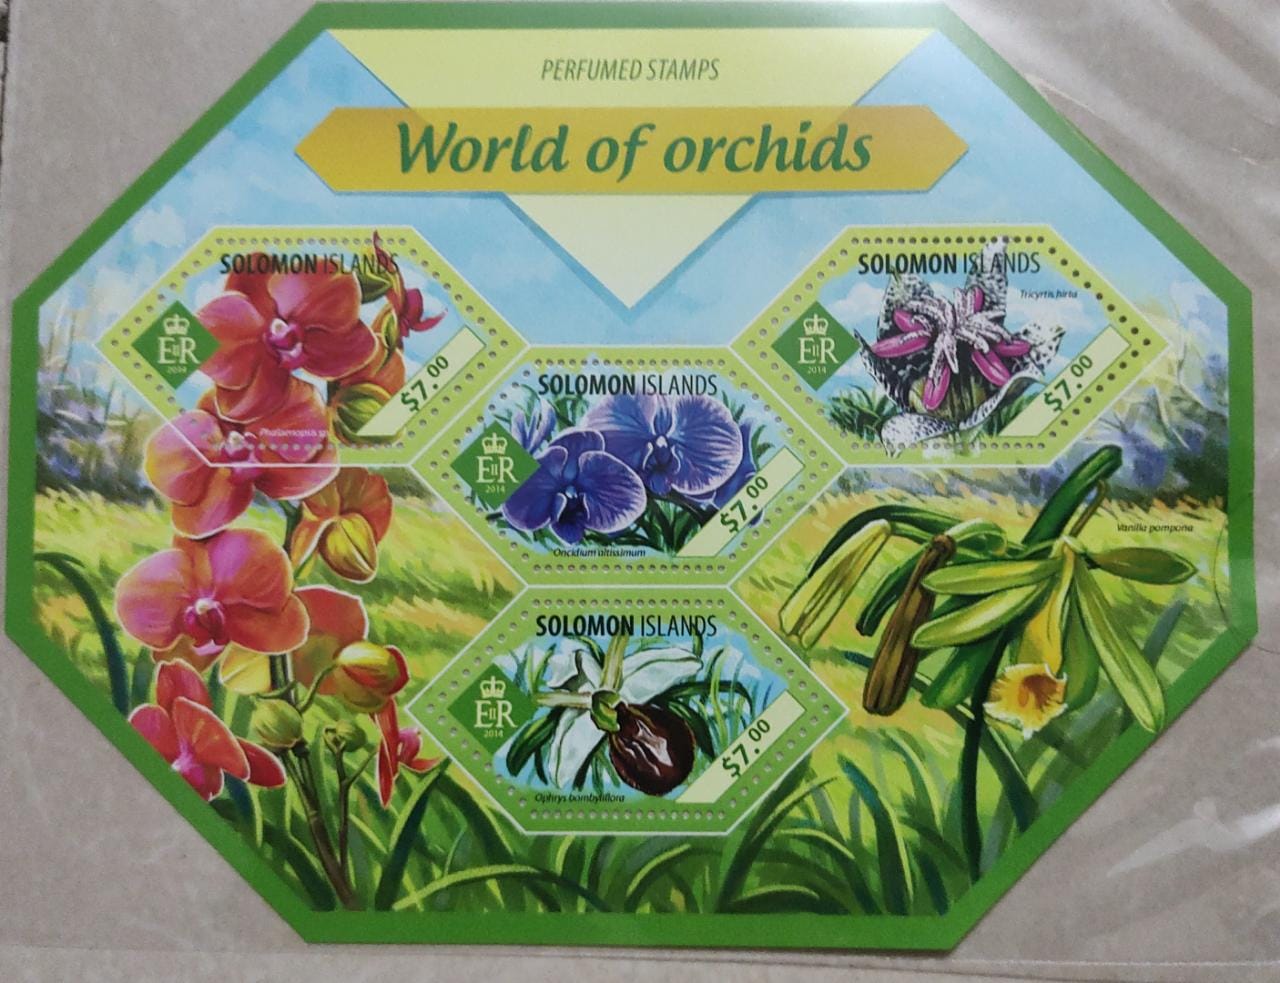 Solomon Islands odd shaped ms with odd shaped stamps with fragrance of orchids.